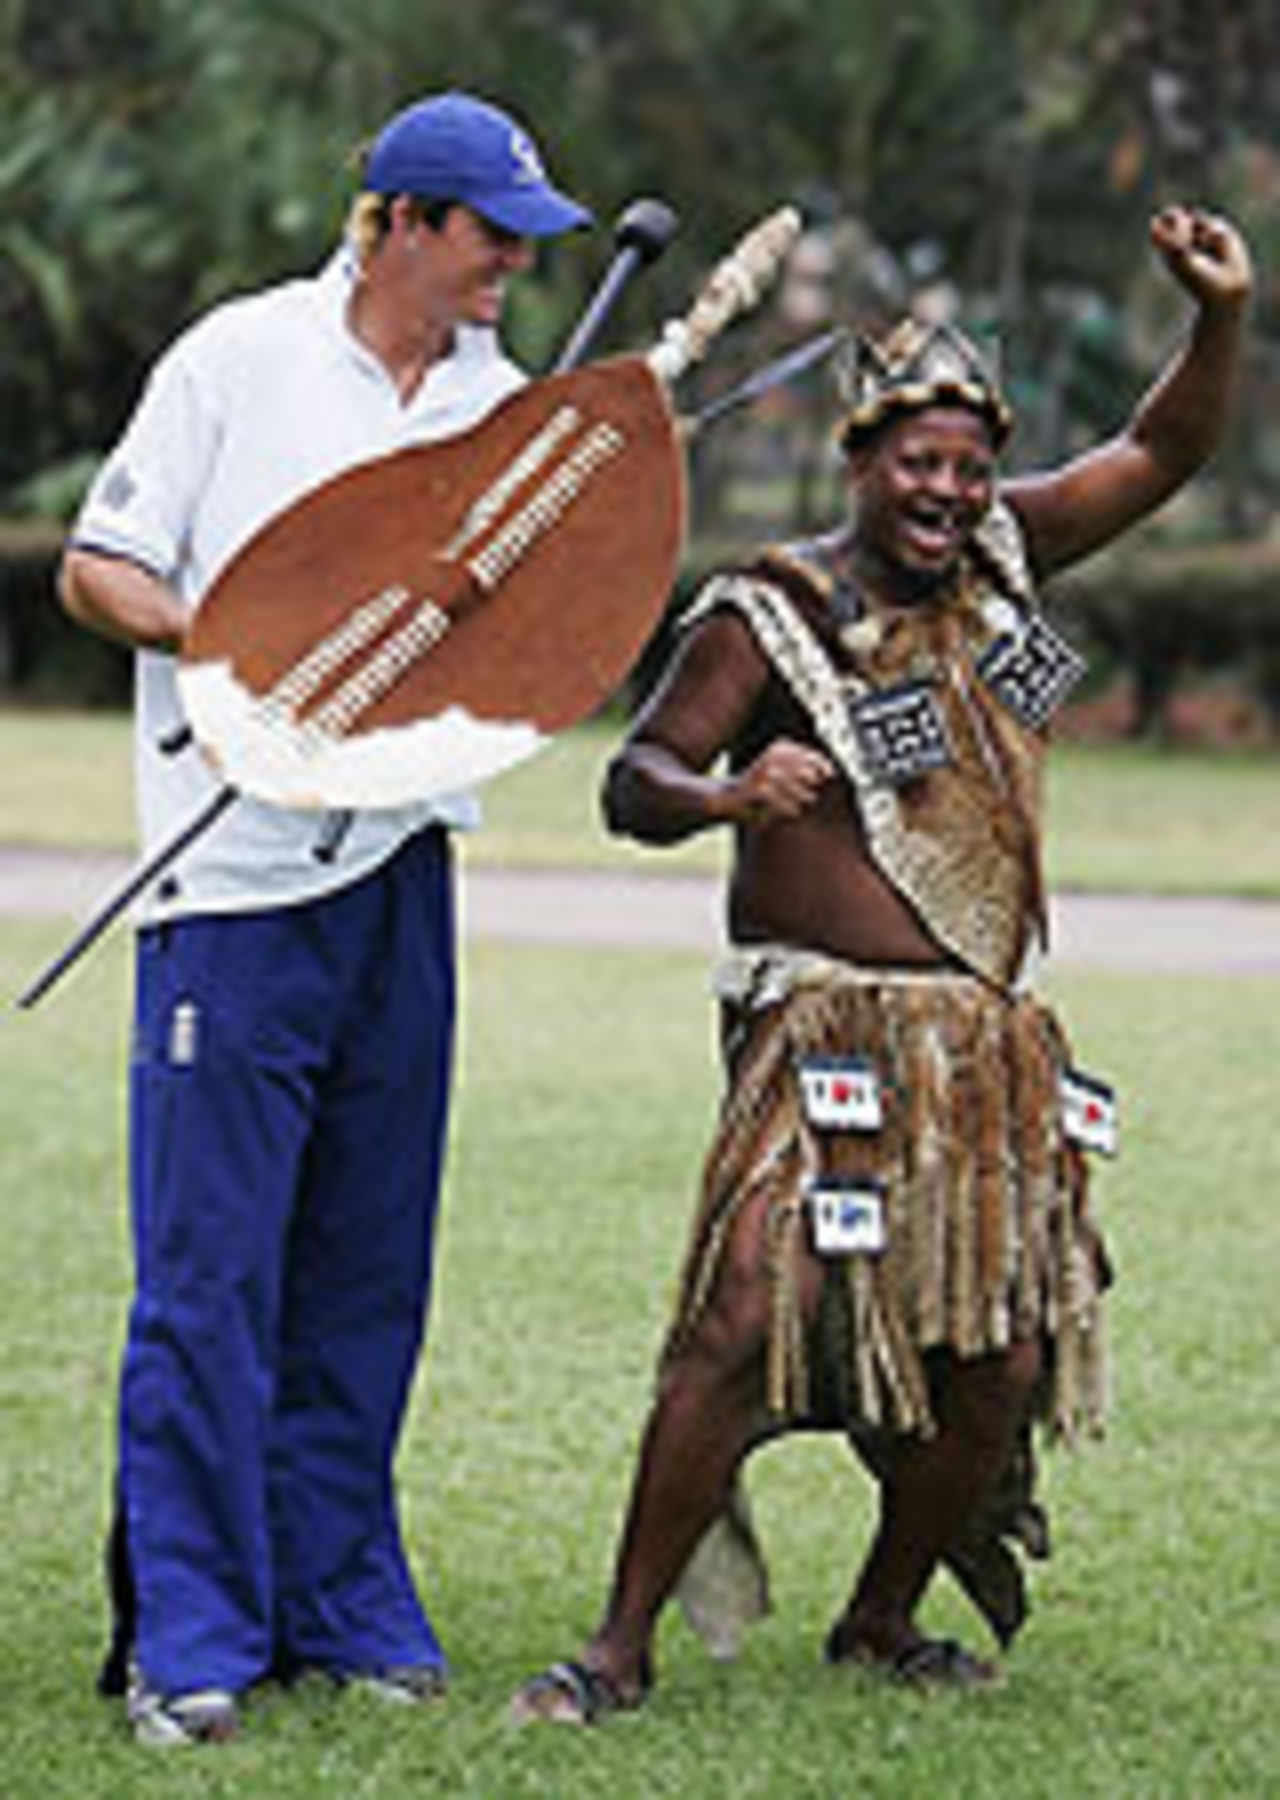 Kevin Pietersen meets the locals ahead of England's sixth one-day international at Durban, February 10, 2005